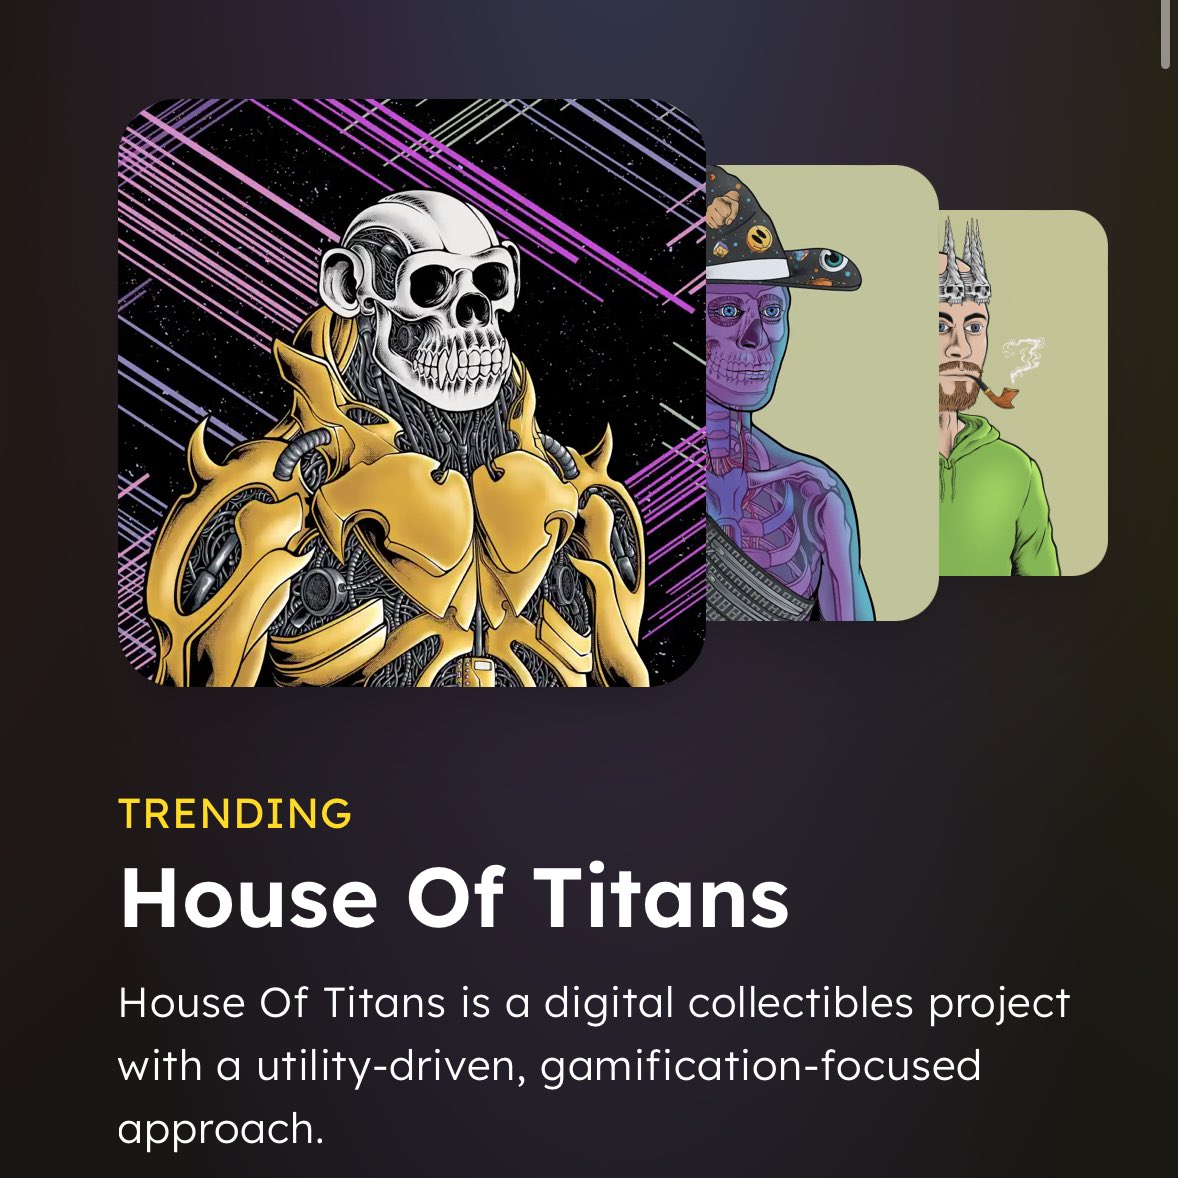 NGL… I love seeing this in @jpgstoreNFT… Huge welcome to all the new community members that have joined us over the past week! We are building something special 🔥 @HouseOfTitans_